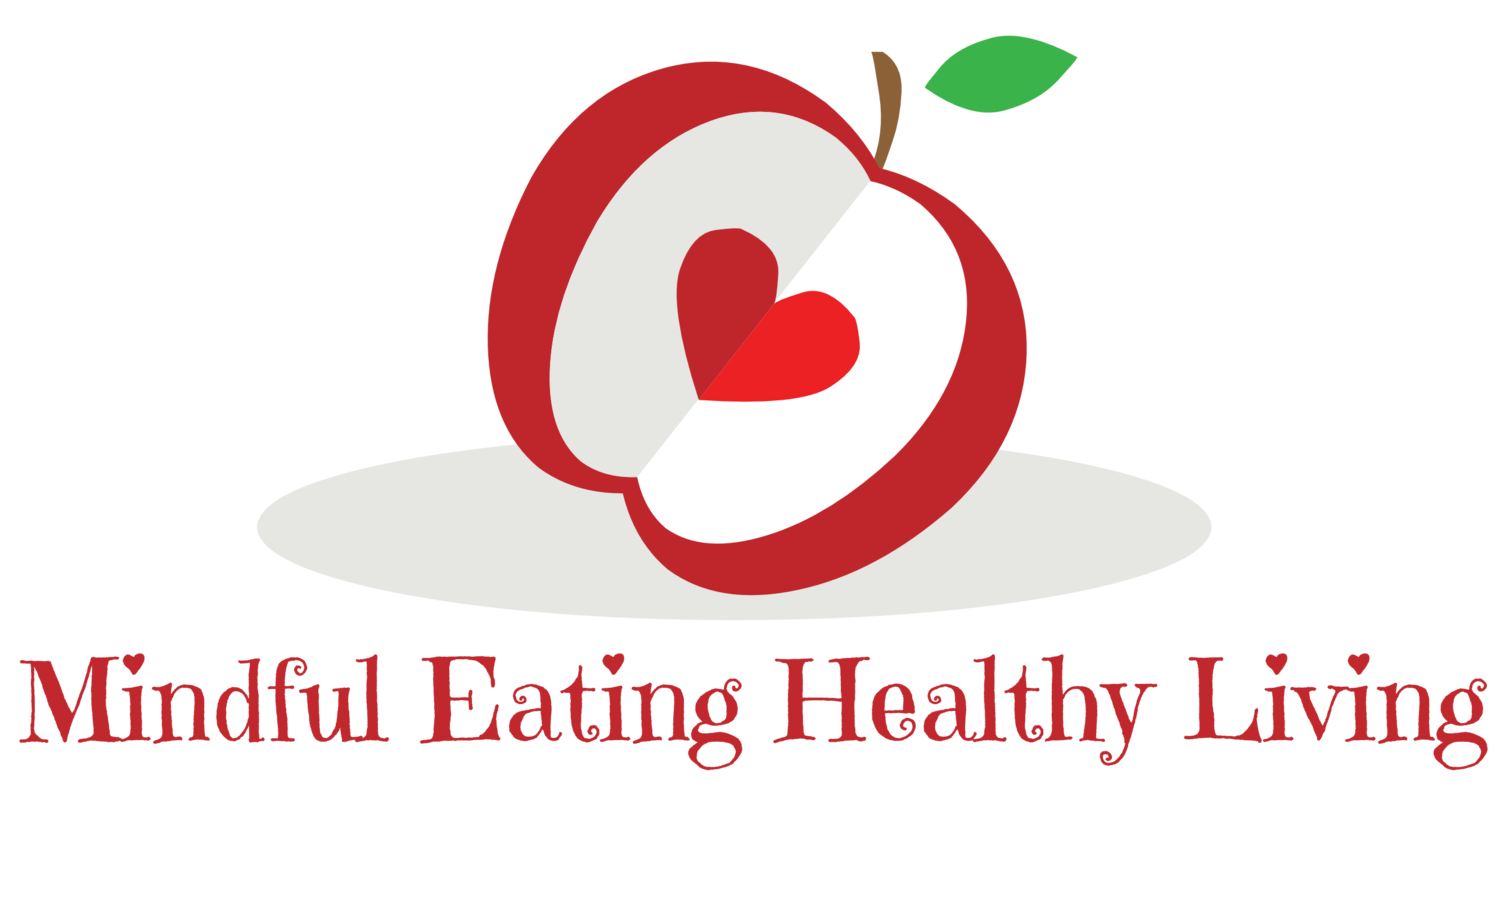 Mindful Eating Healthy Living